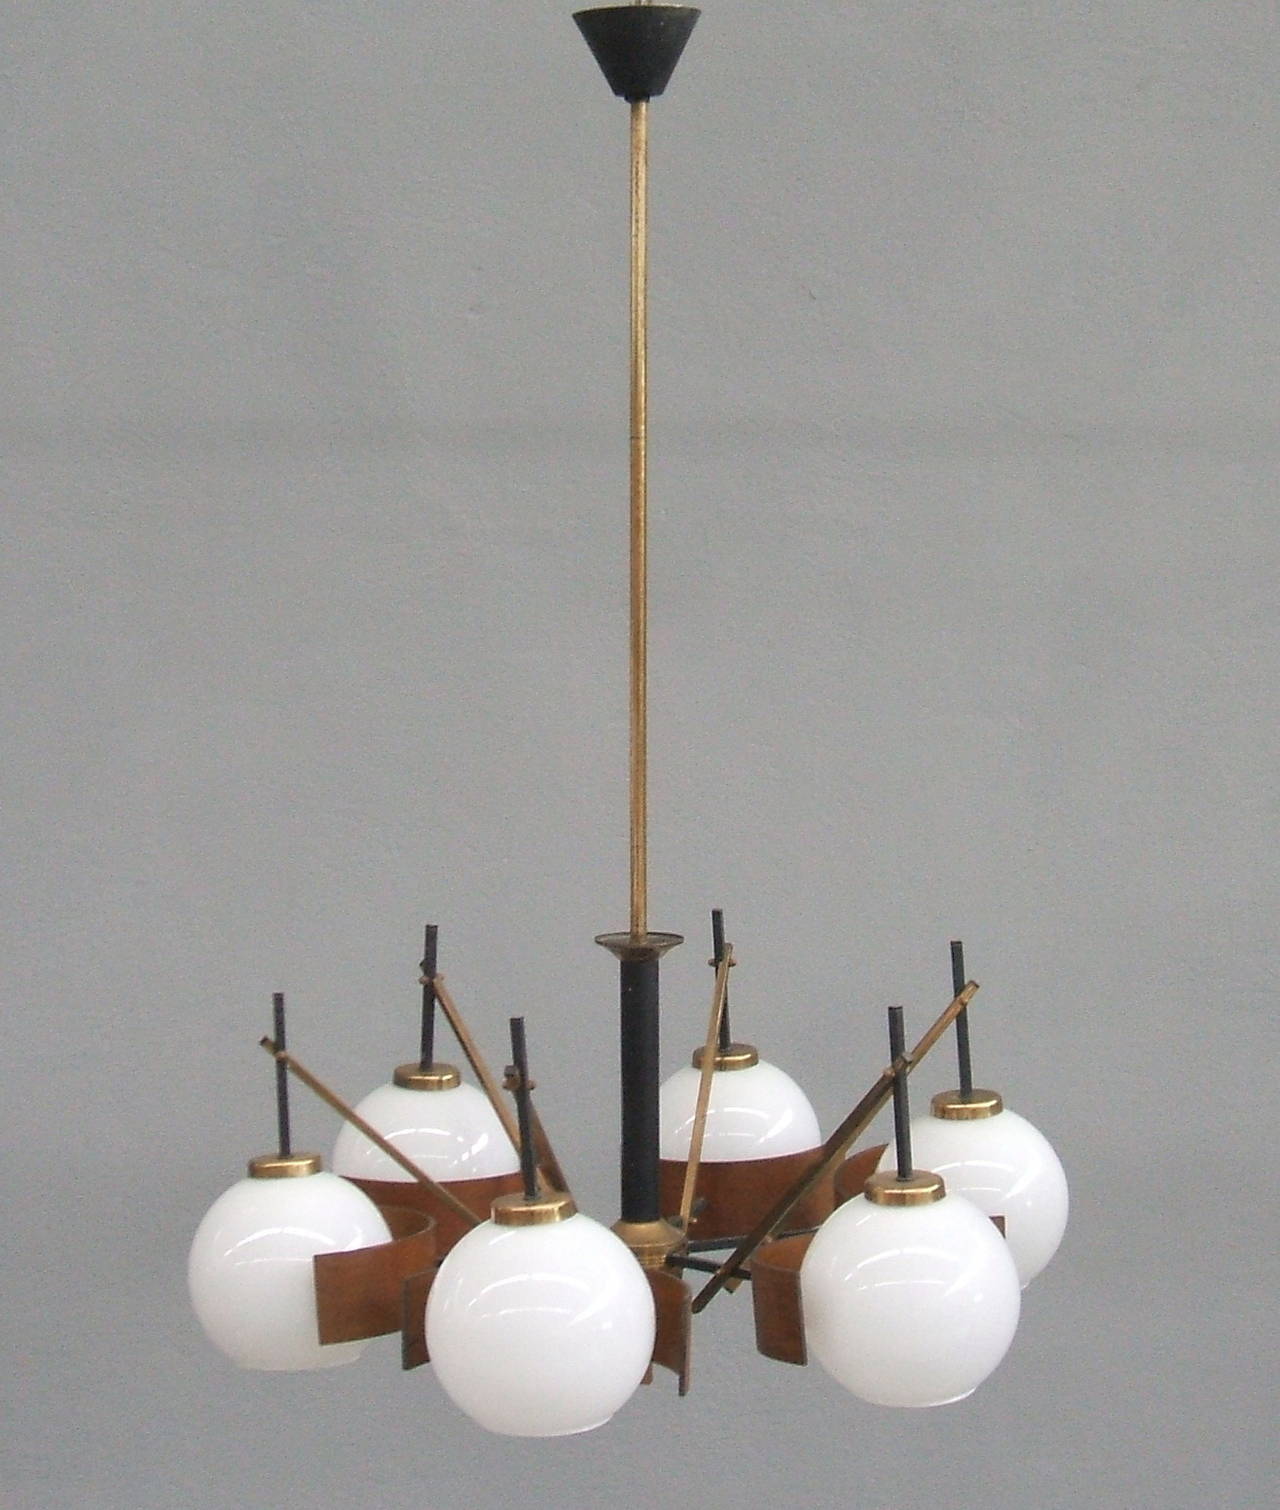 Six lights Italian chandelier with opaline glass, brass, wood and lacquered metal.